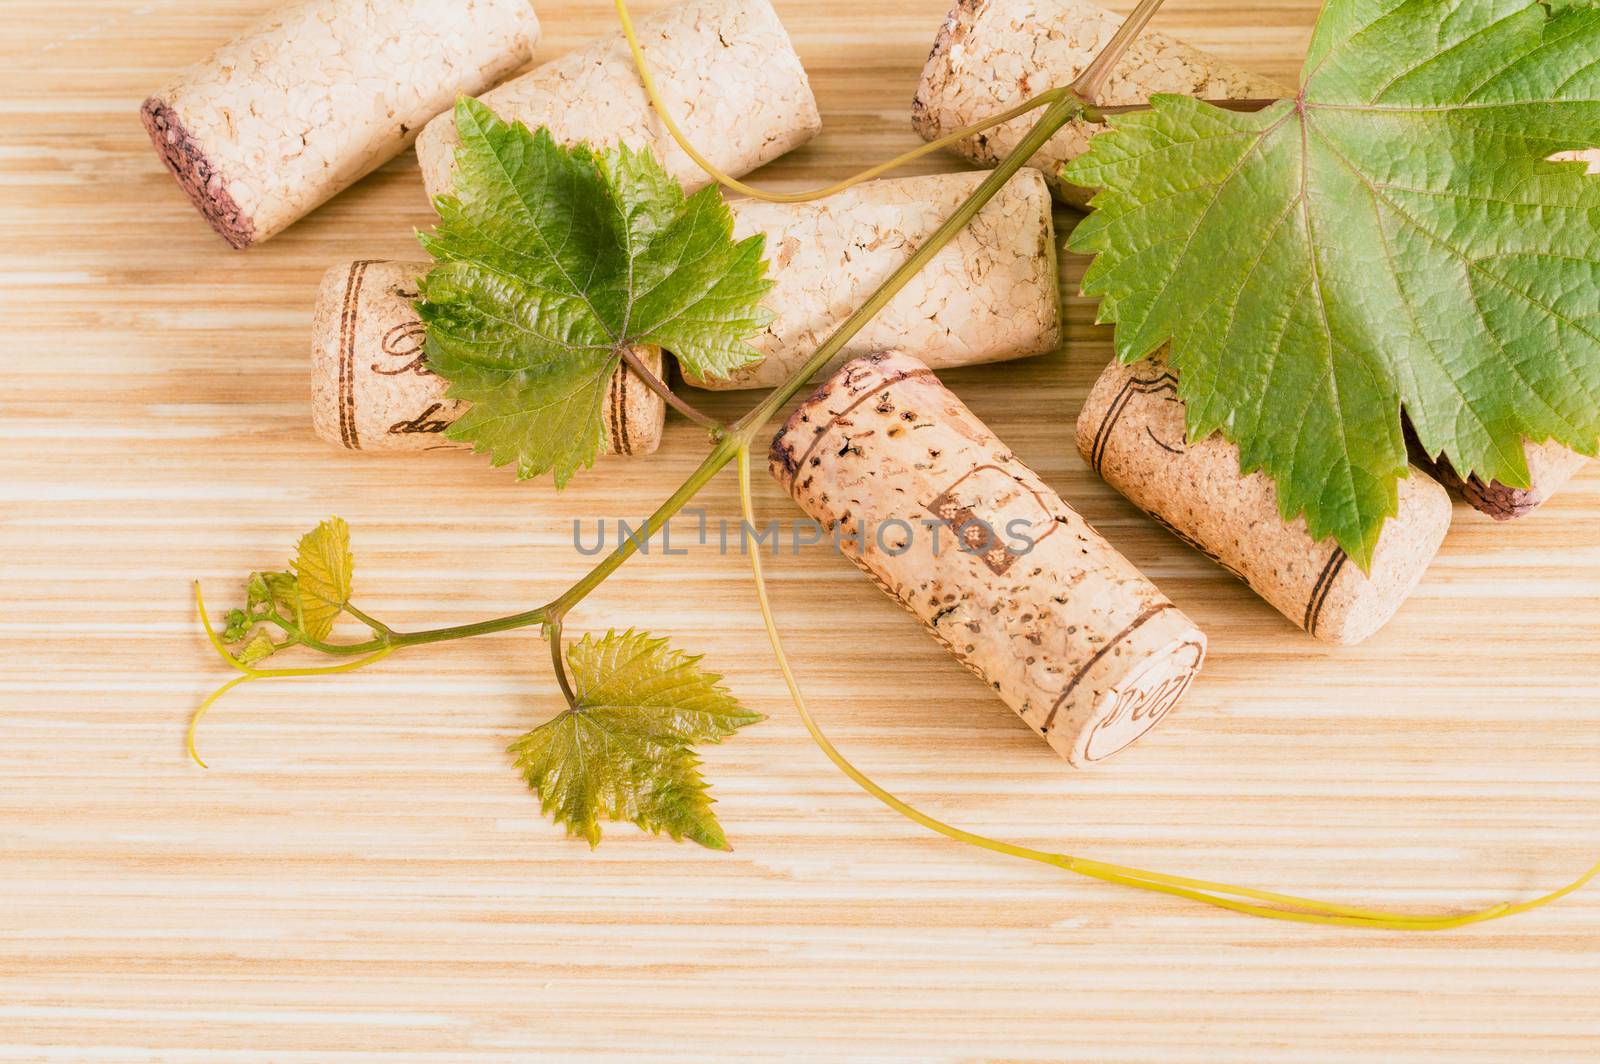 Wine bottle with vine and wine cork put on the board. by kerdkanno